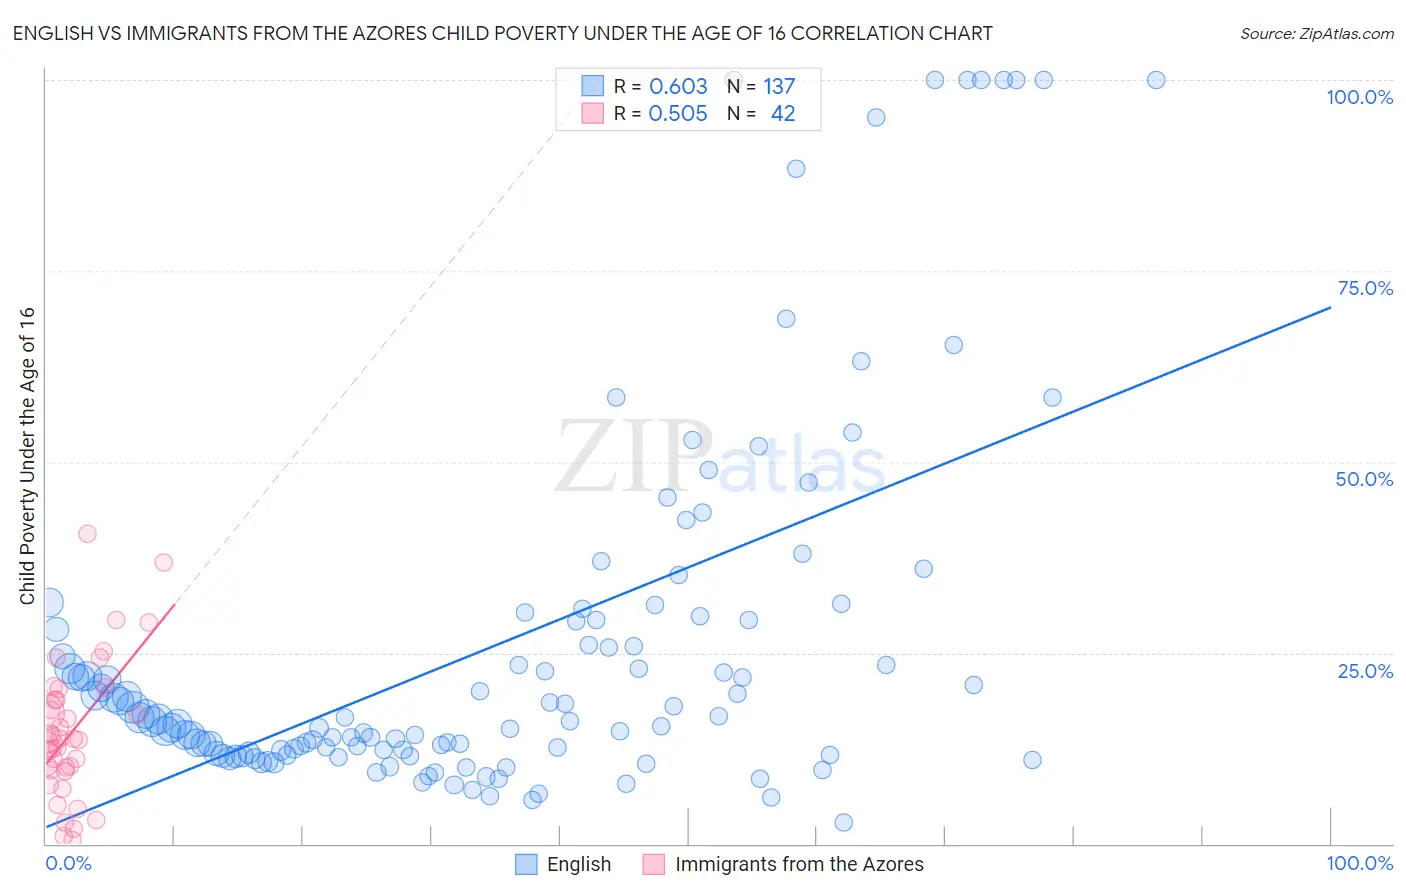 English vs Immigrants from the Azores Child Poverty Under the Age of 16